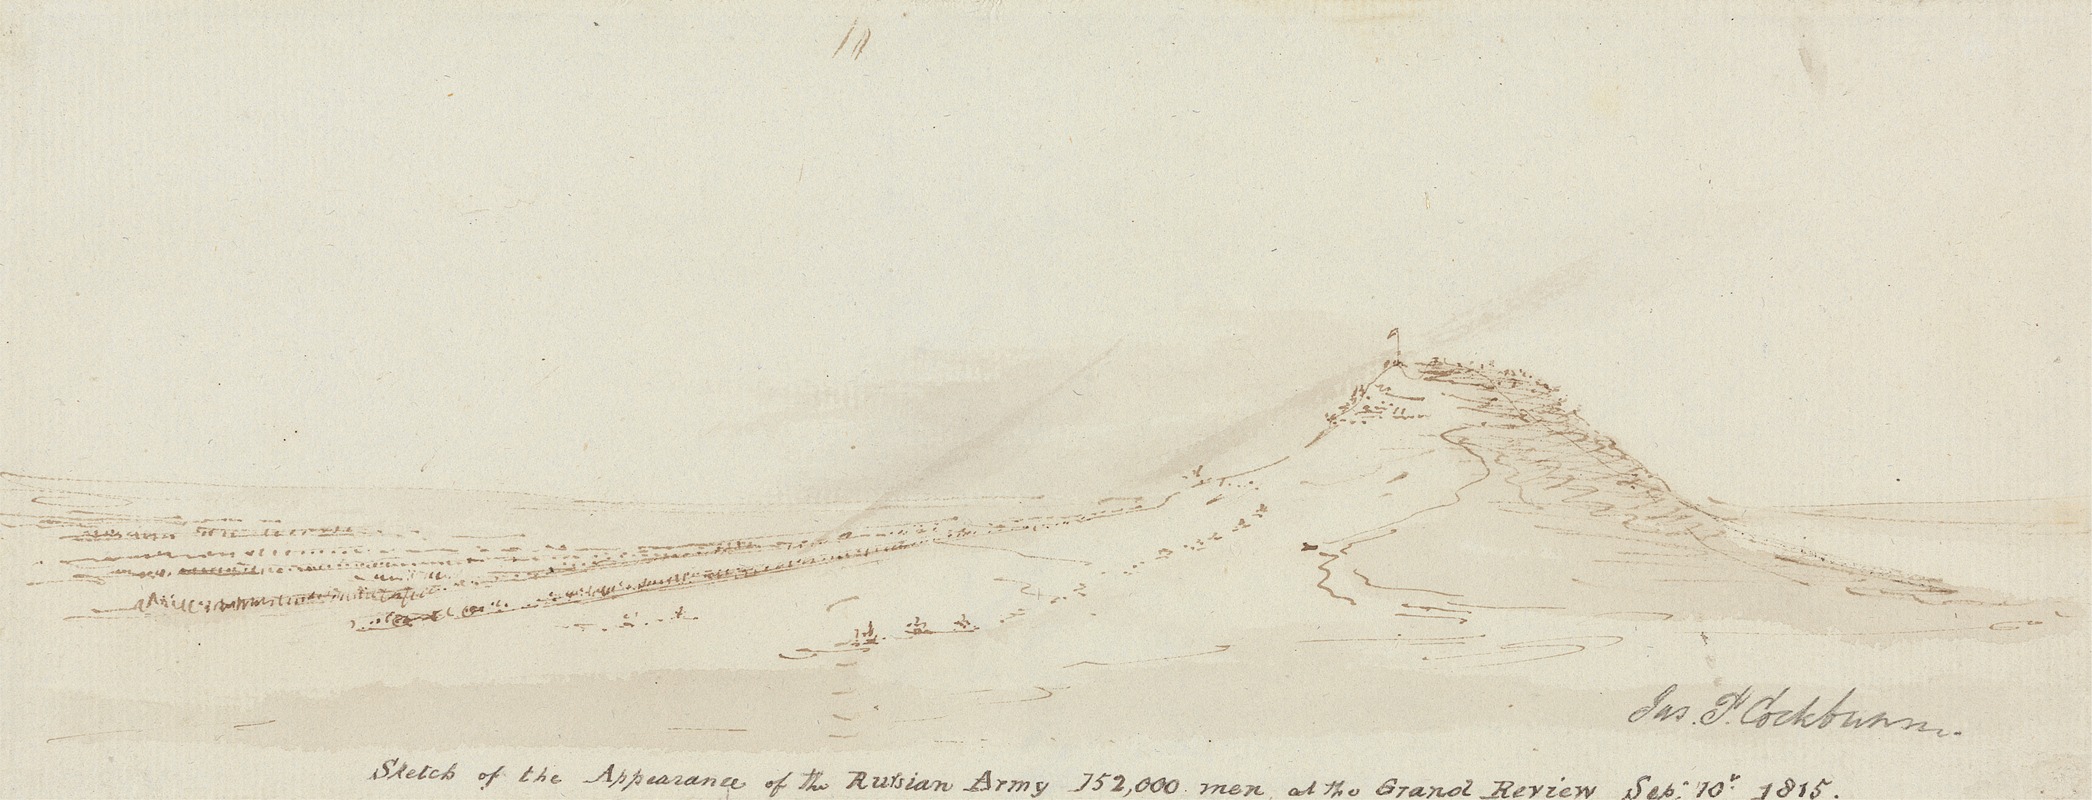 James Pattison Cockburn - Sketch of the Appearance of the Russian Army, 152,000 Men at the Grand Review, September 10, 1815